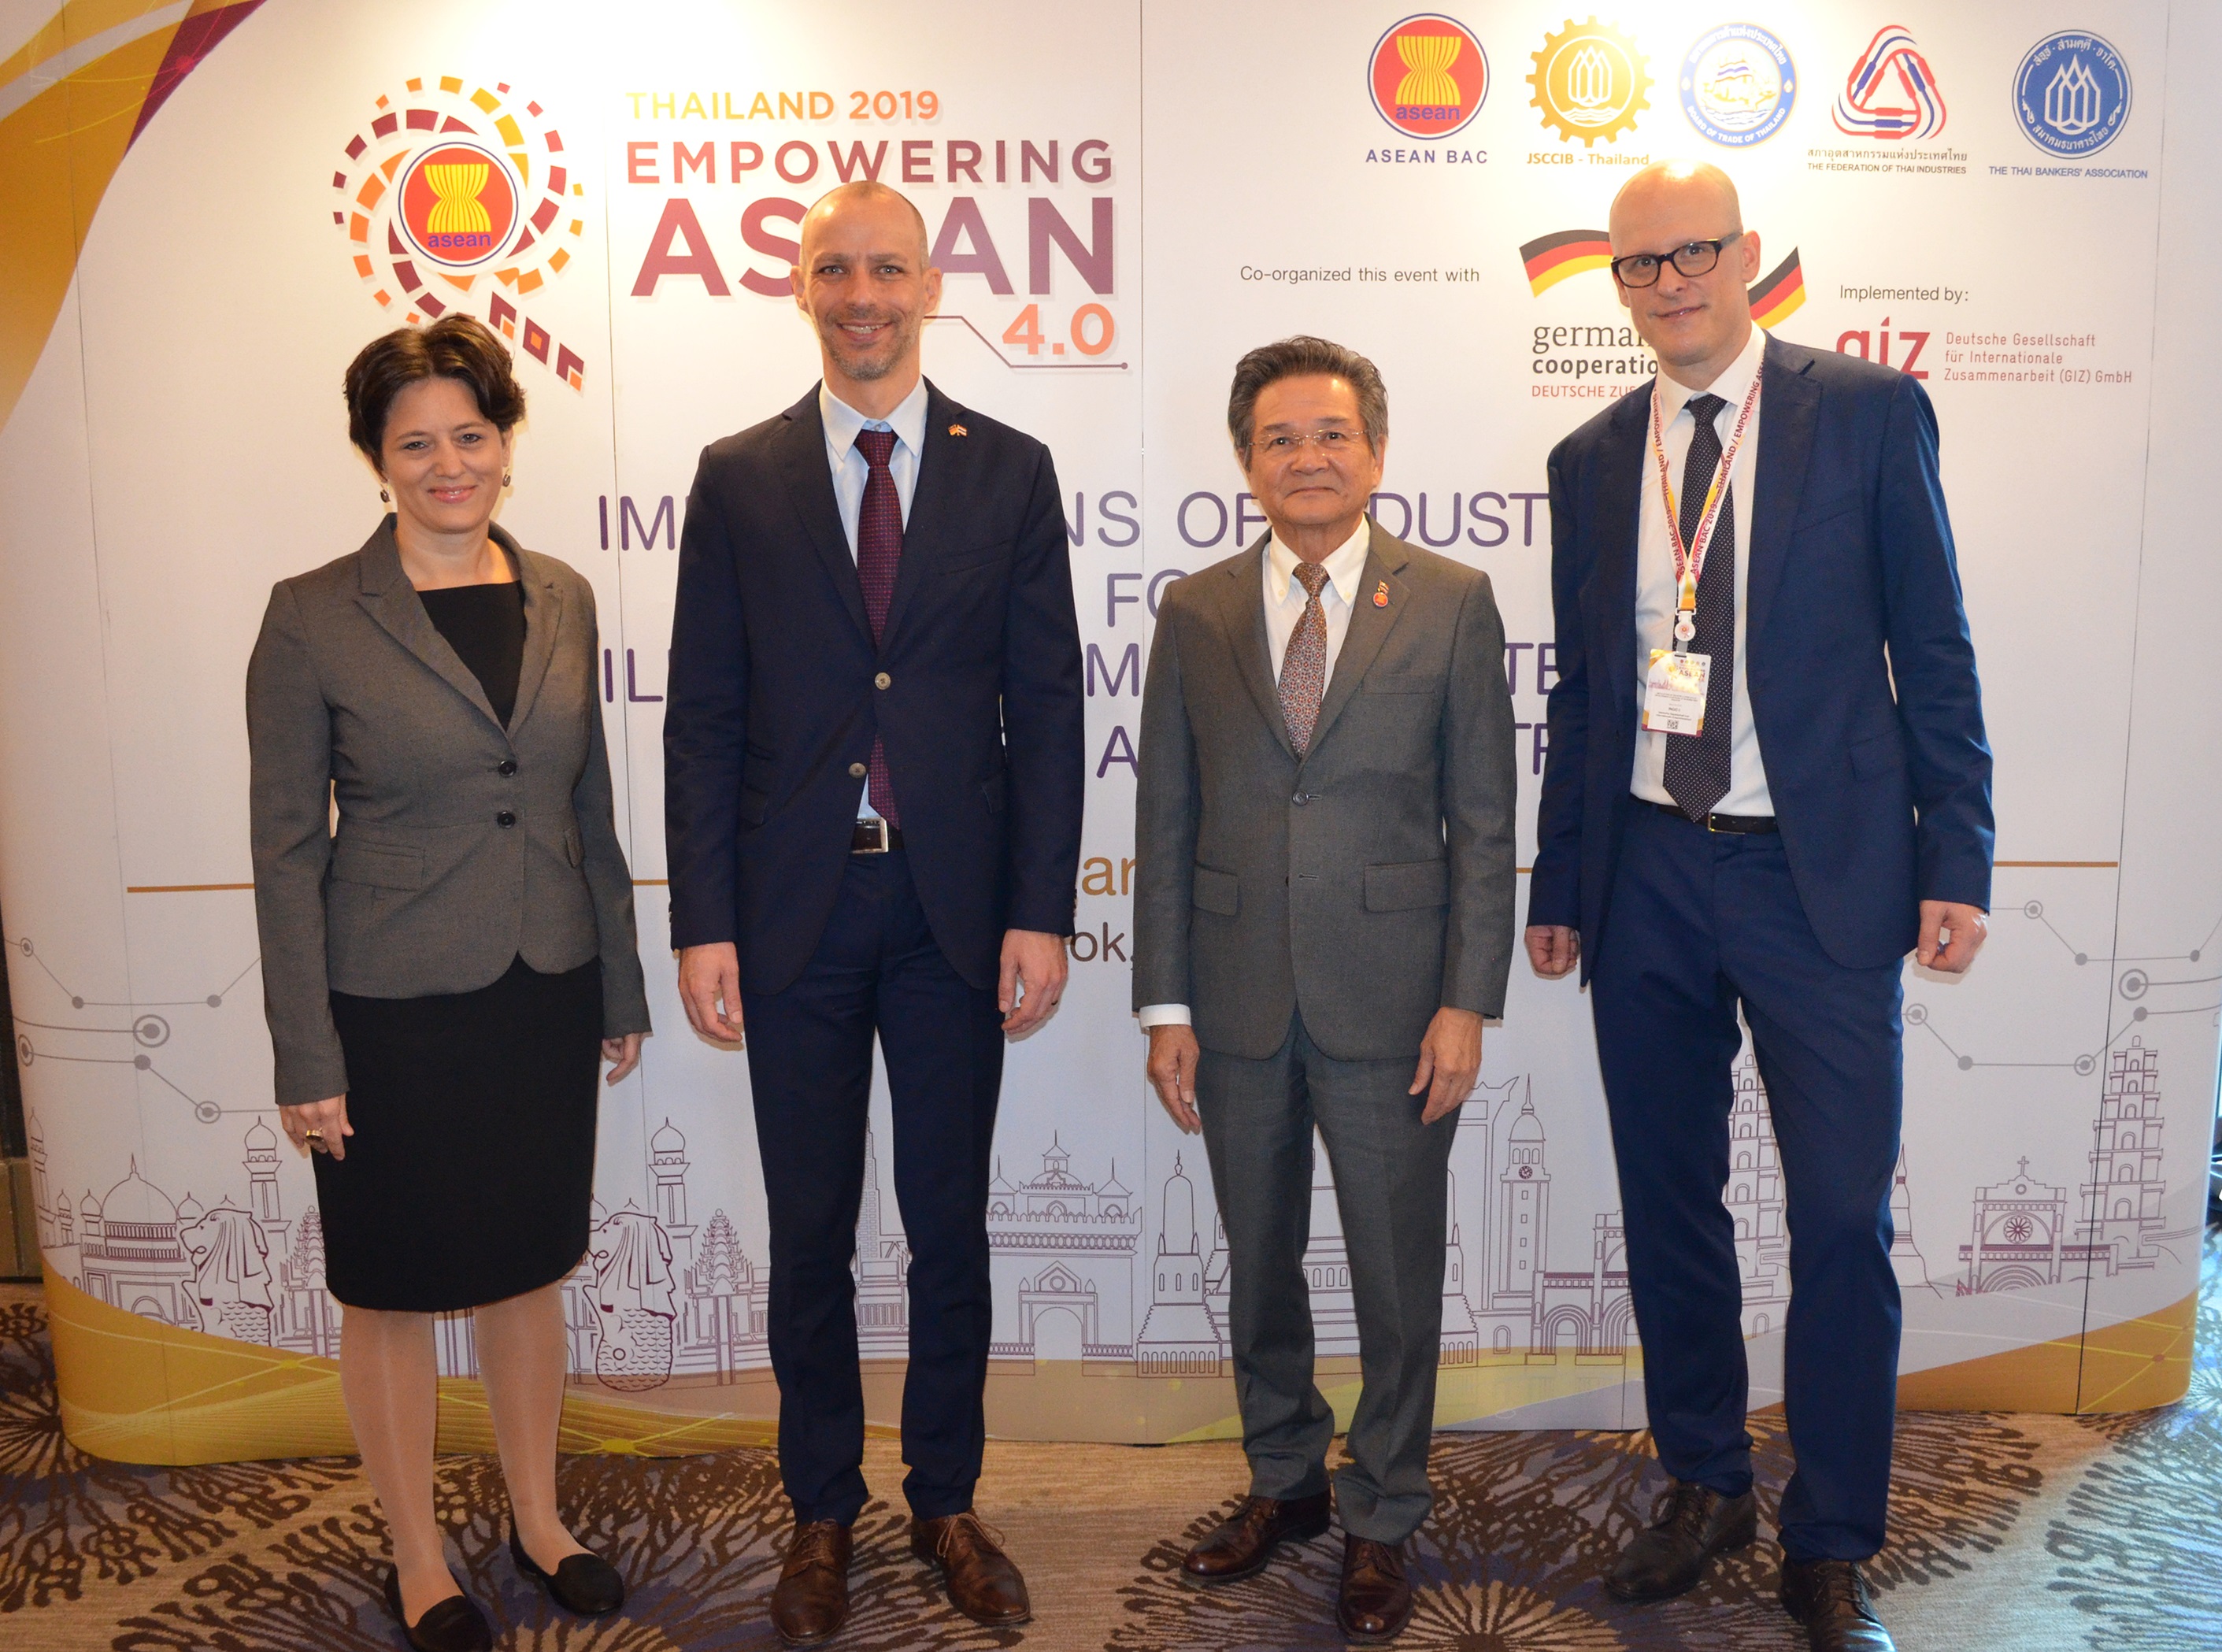 Empowering ASEAN 4.0: Implications of Industry 4.0 for Skills Development Strategies of Business and Industry